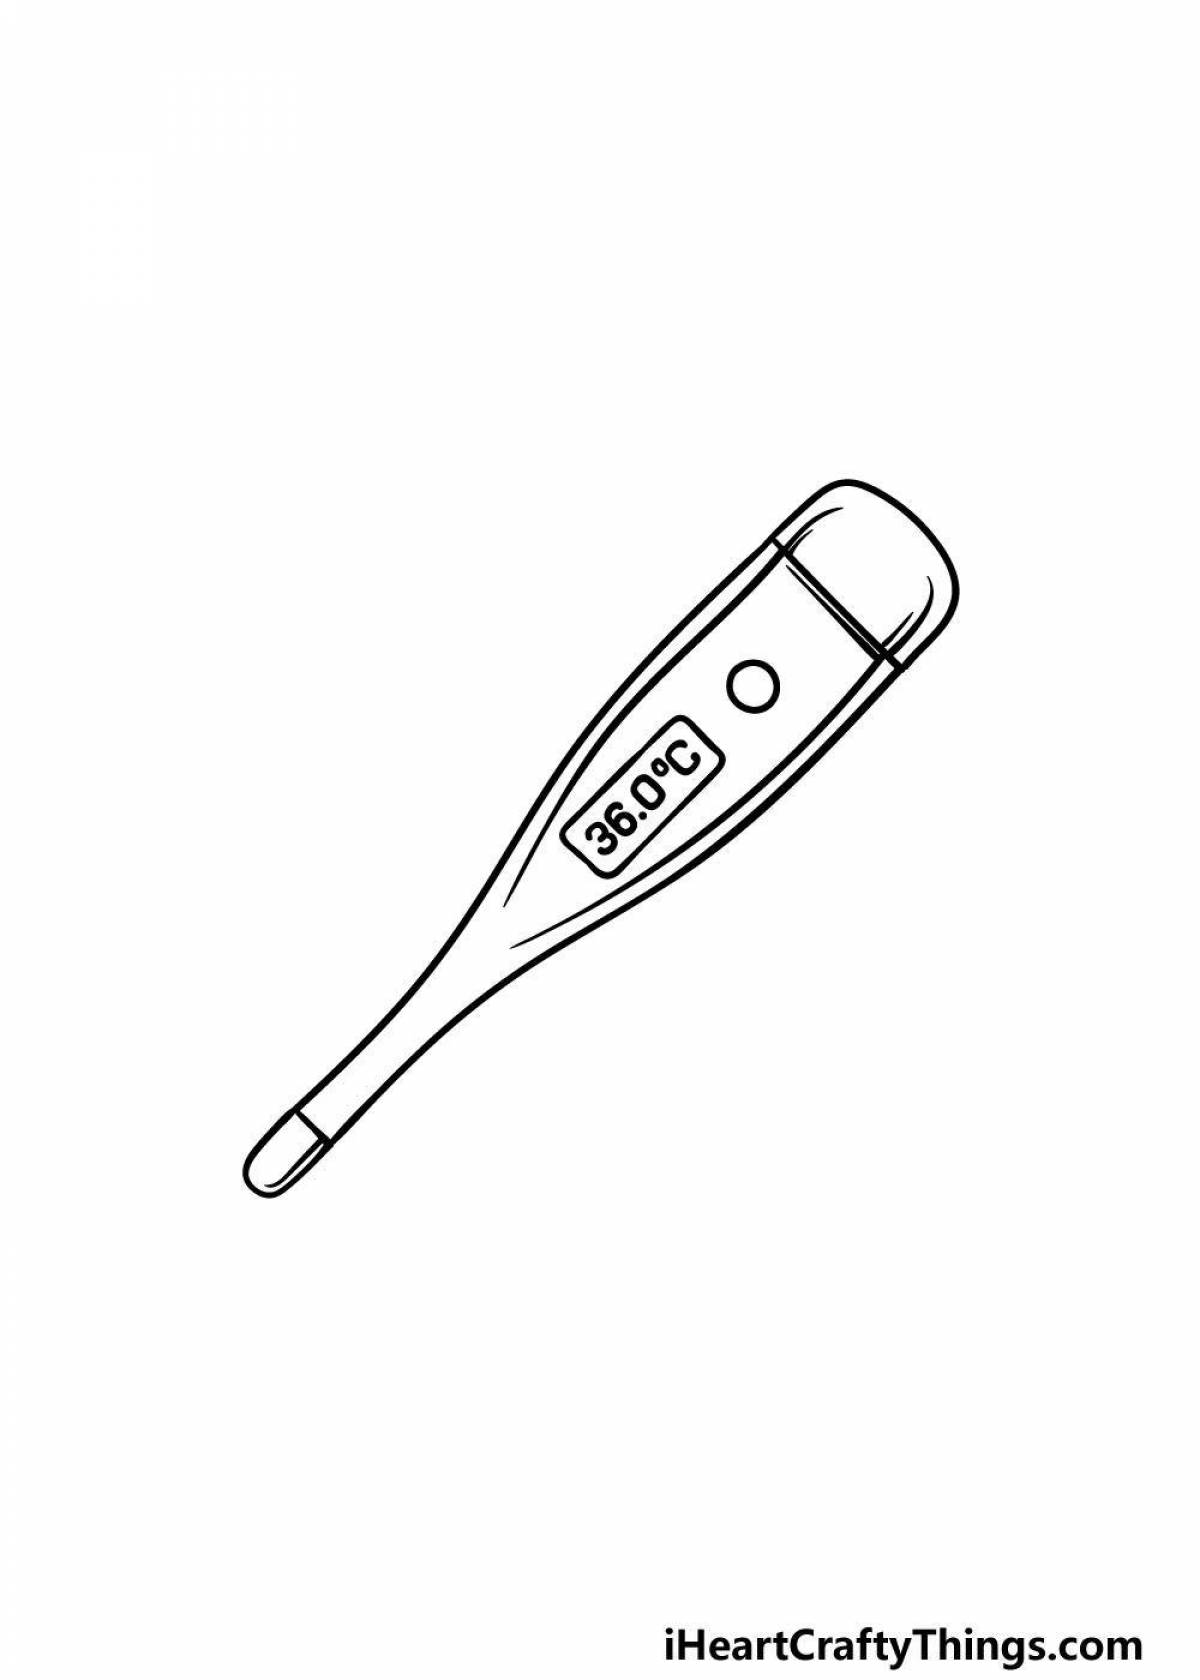 Colorful thermometer coloring book for beginners